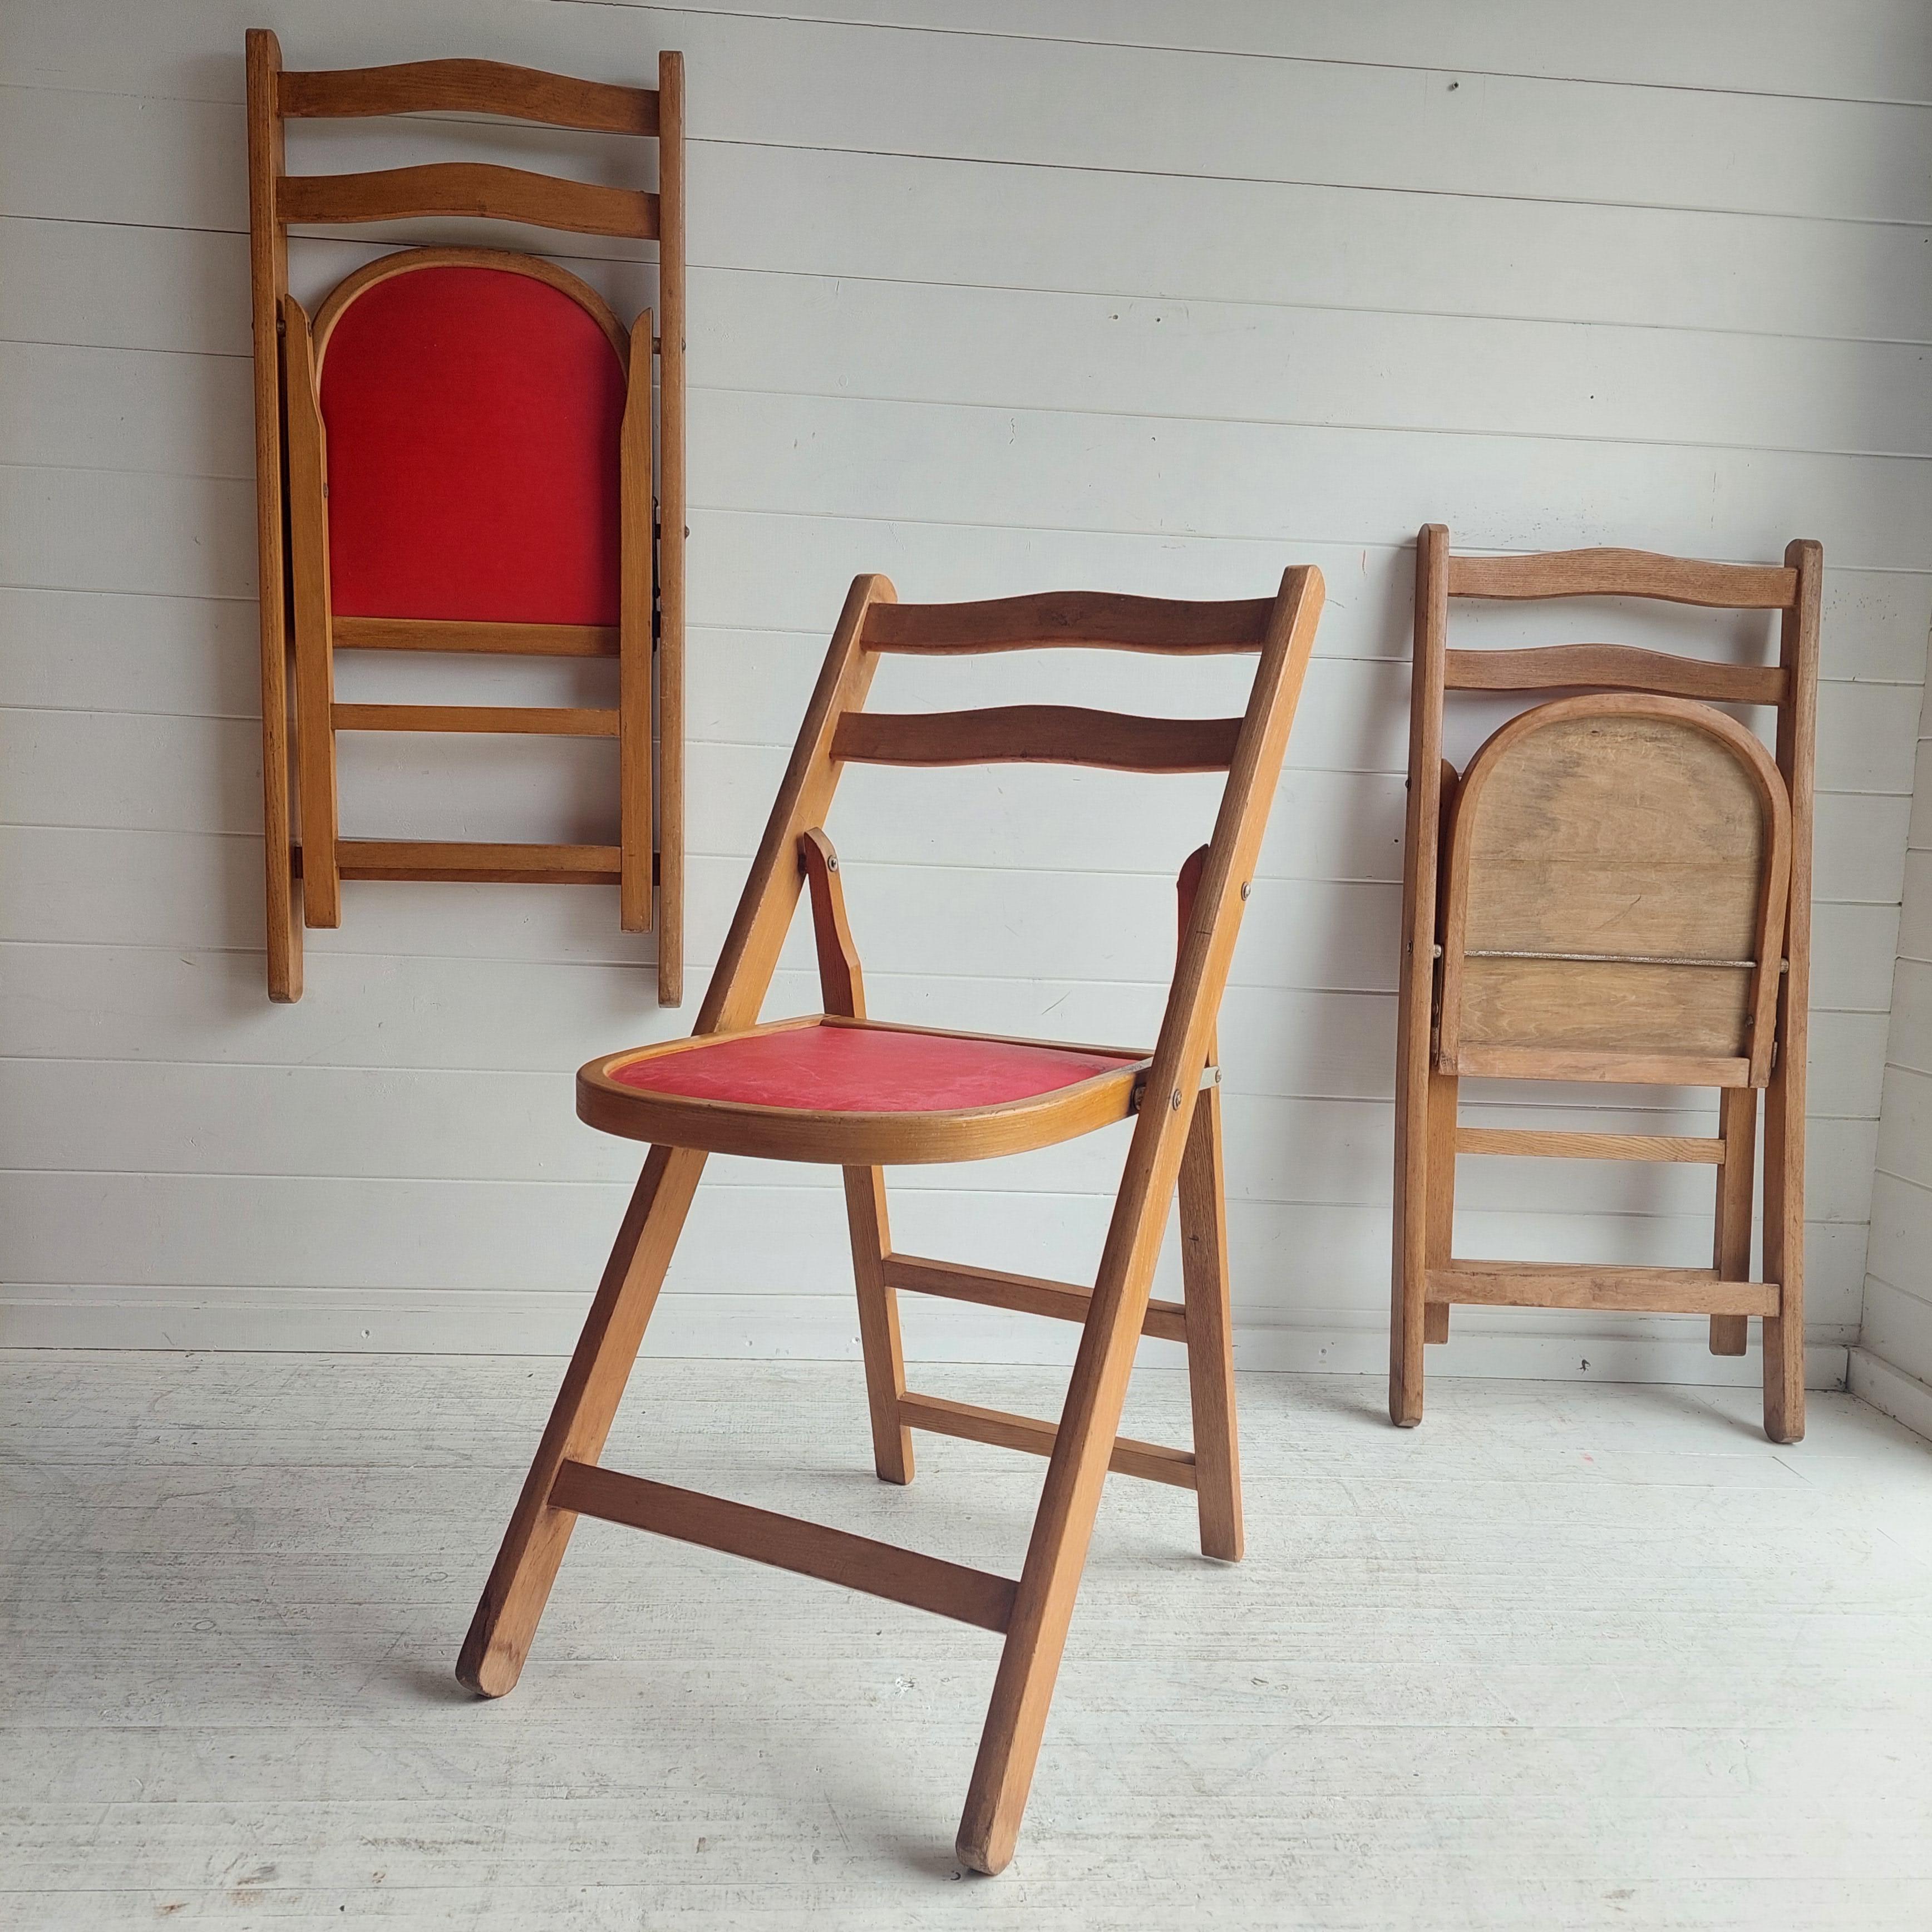 Set of 3 folding chairs produced most probably in Sweden in the 1950s 60s. 
Beechwood frame, seat in red cotton fabric. 
These wooden folding chairs are a great vintage find. 
The chairs are full of retro character.

Their folding ability makes them